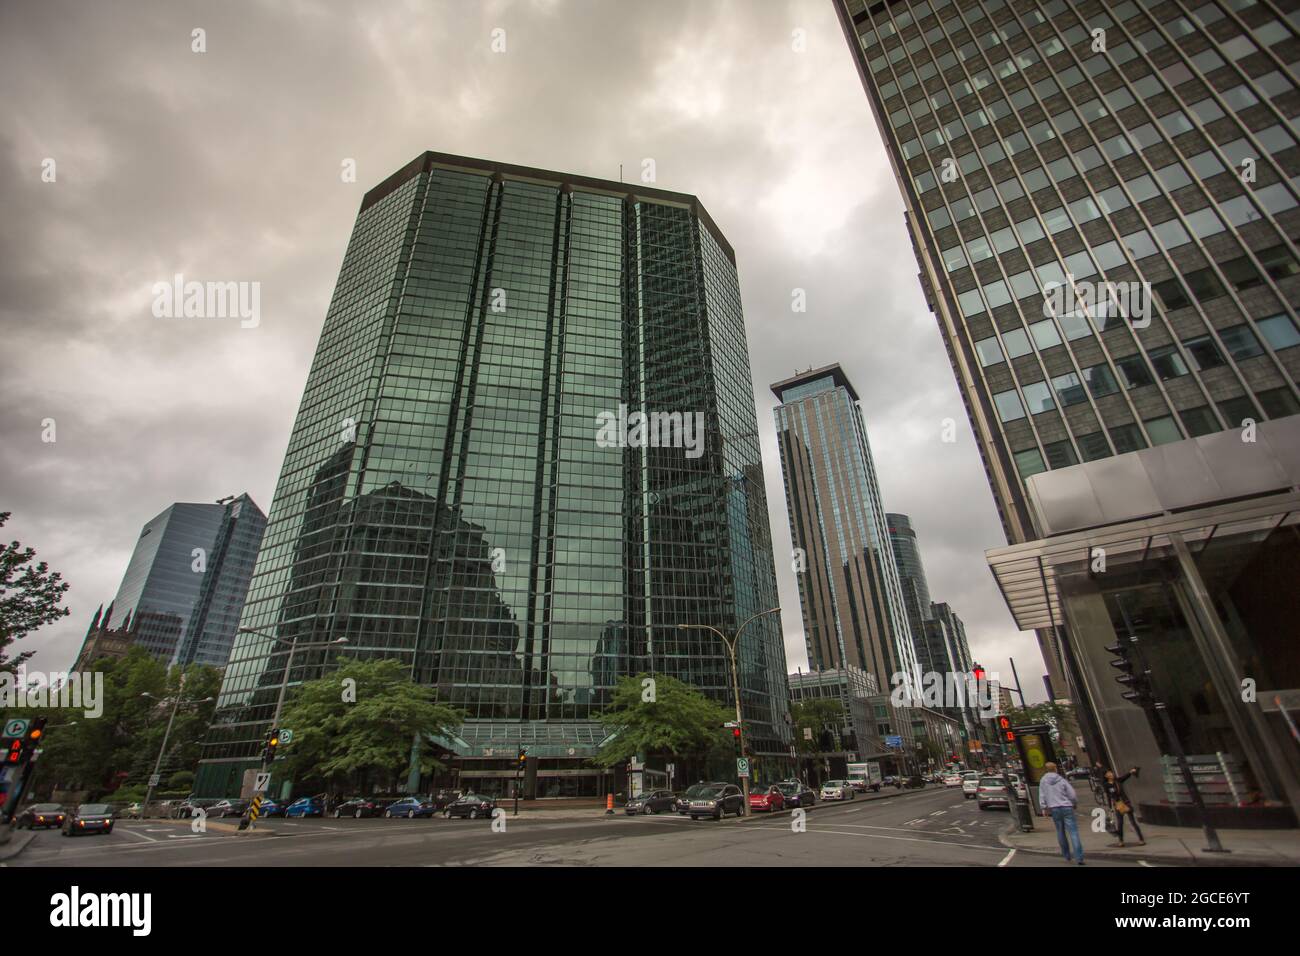 Montreal City Downtown business and financial buildings Stock Photo